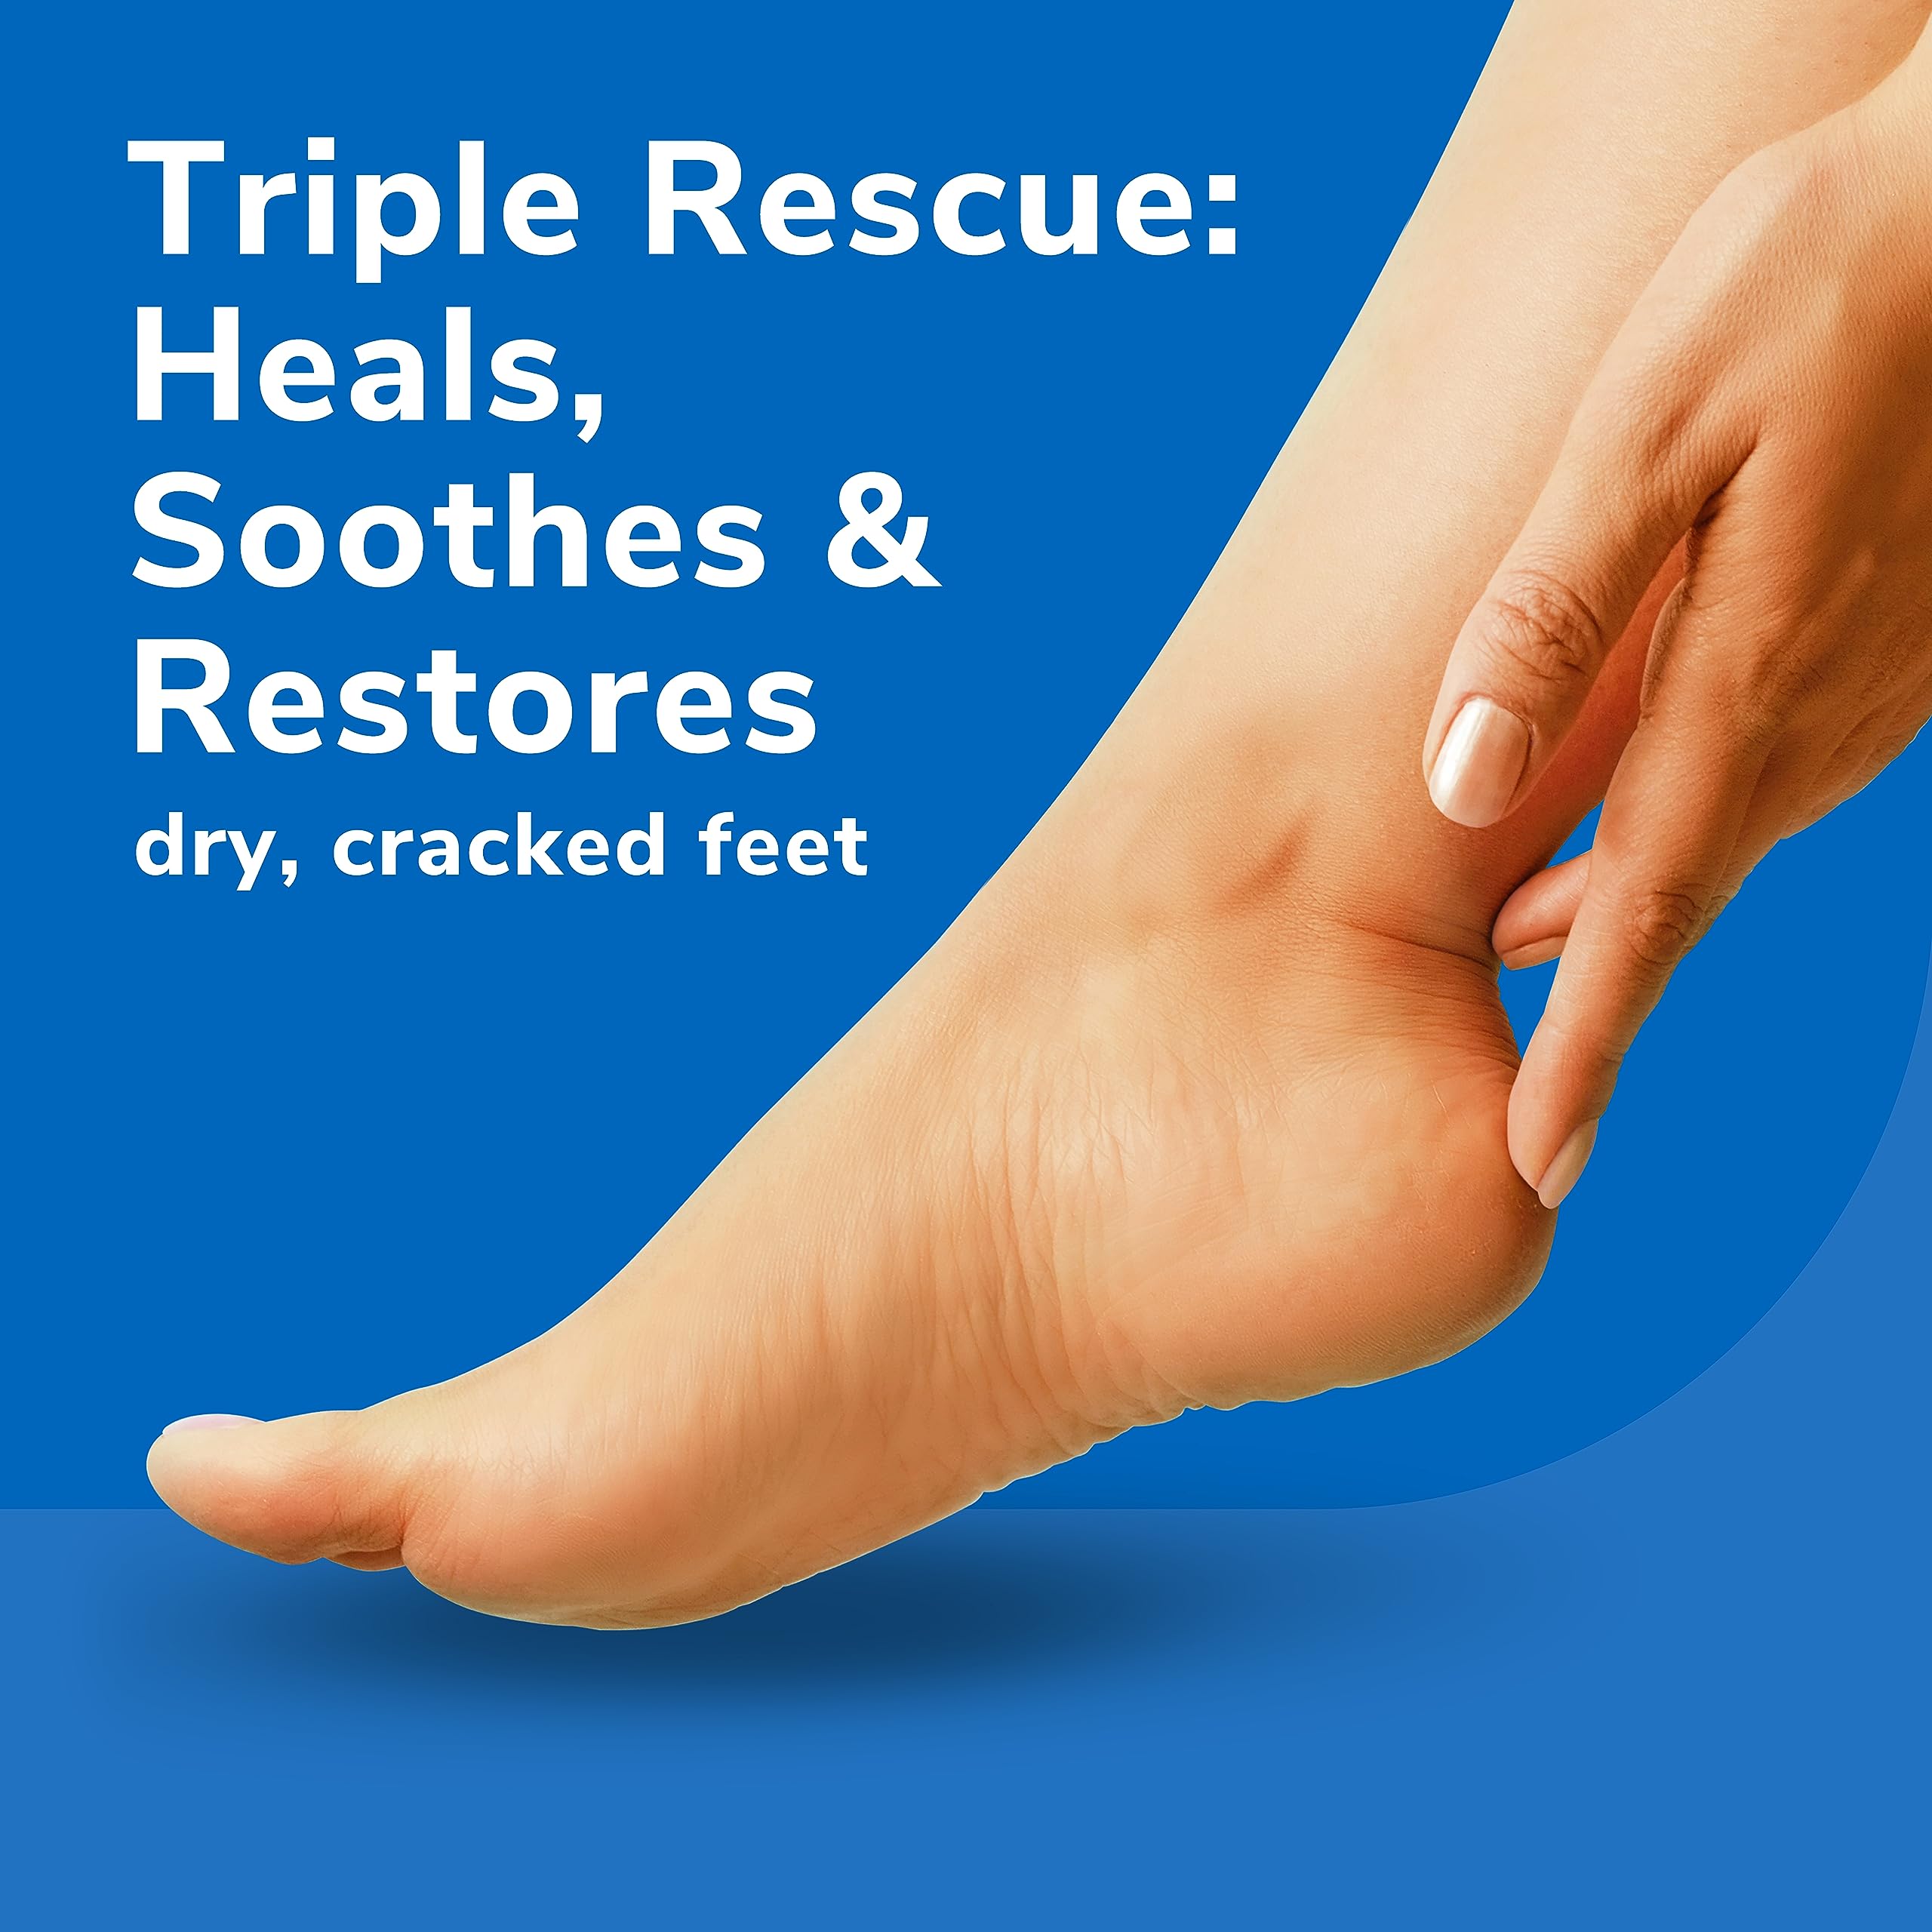 Dr. Scholl's Dry, Cracked Foot Repair Ultra Hydrating Foot Cream, 3.5 oz Lotion with 25% Urea, Heel Repair, Foot Care Heals for Healthy Looking Feet, Epsom Salt Soothes, Safe for Diabetics